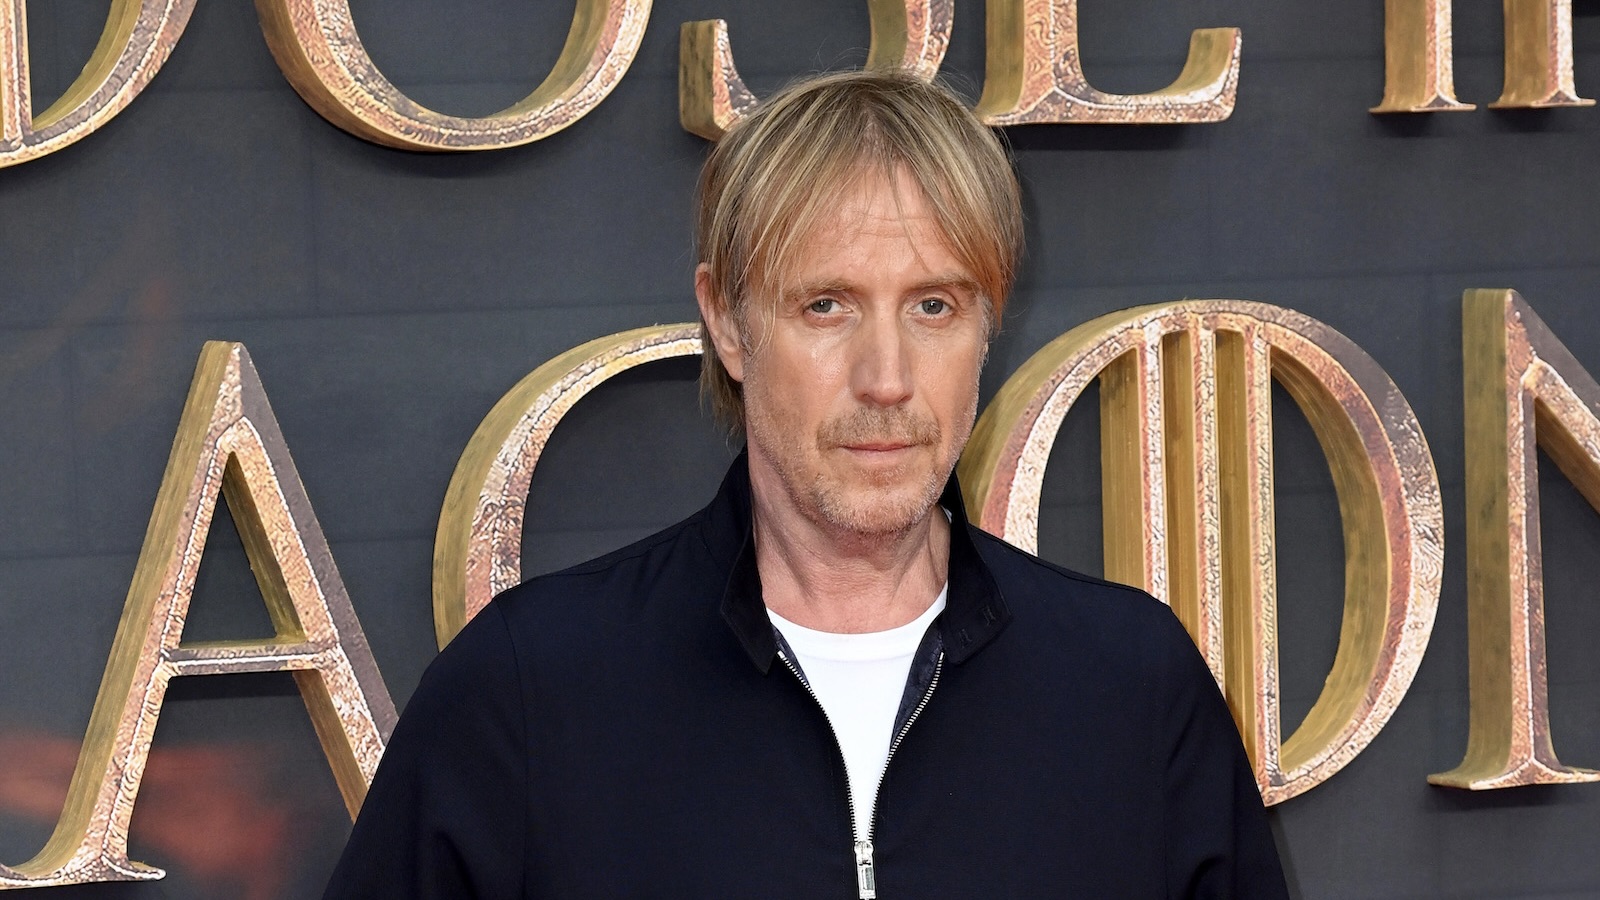 Rhys Ifans attending the House of the Dragon premiere in London, England